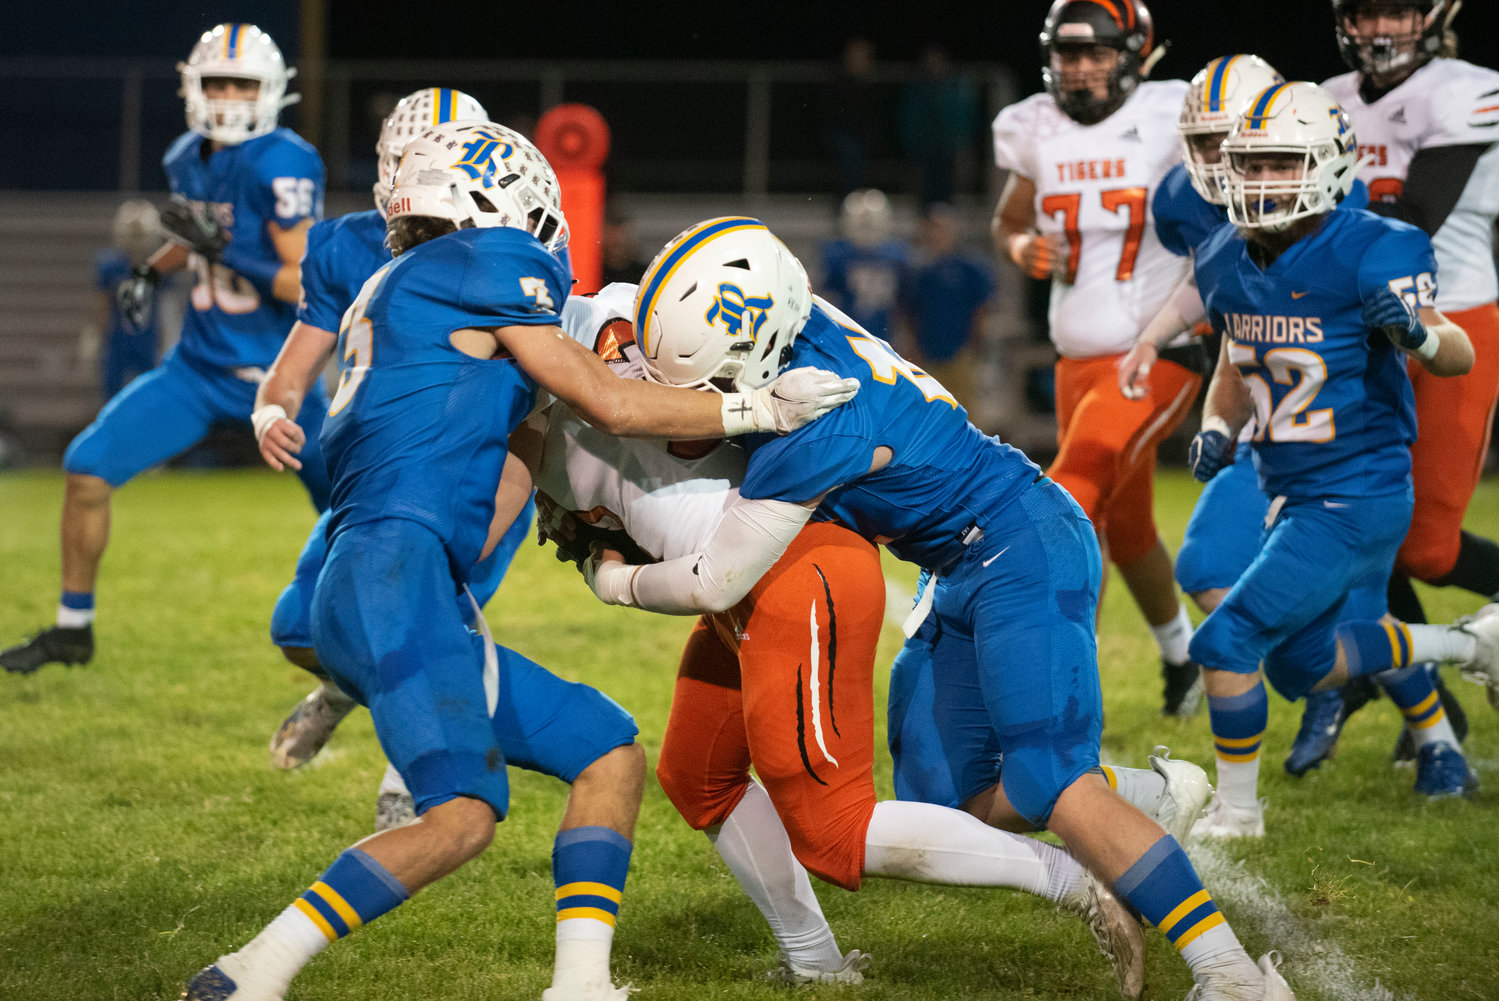 Images from the Centralia at Rochester football game on Oct. 2, 2021 at Rochester High School.